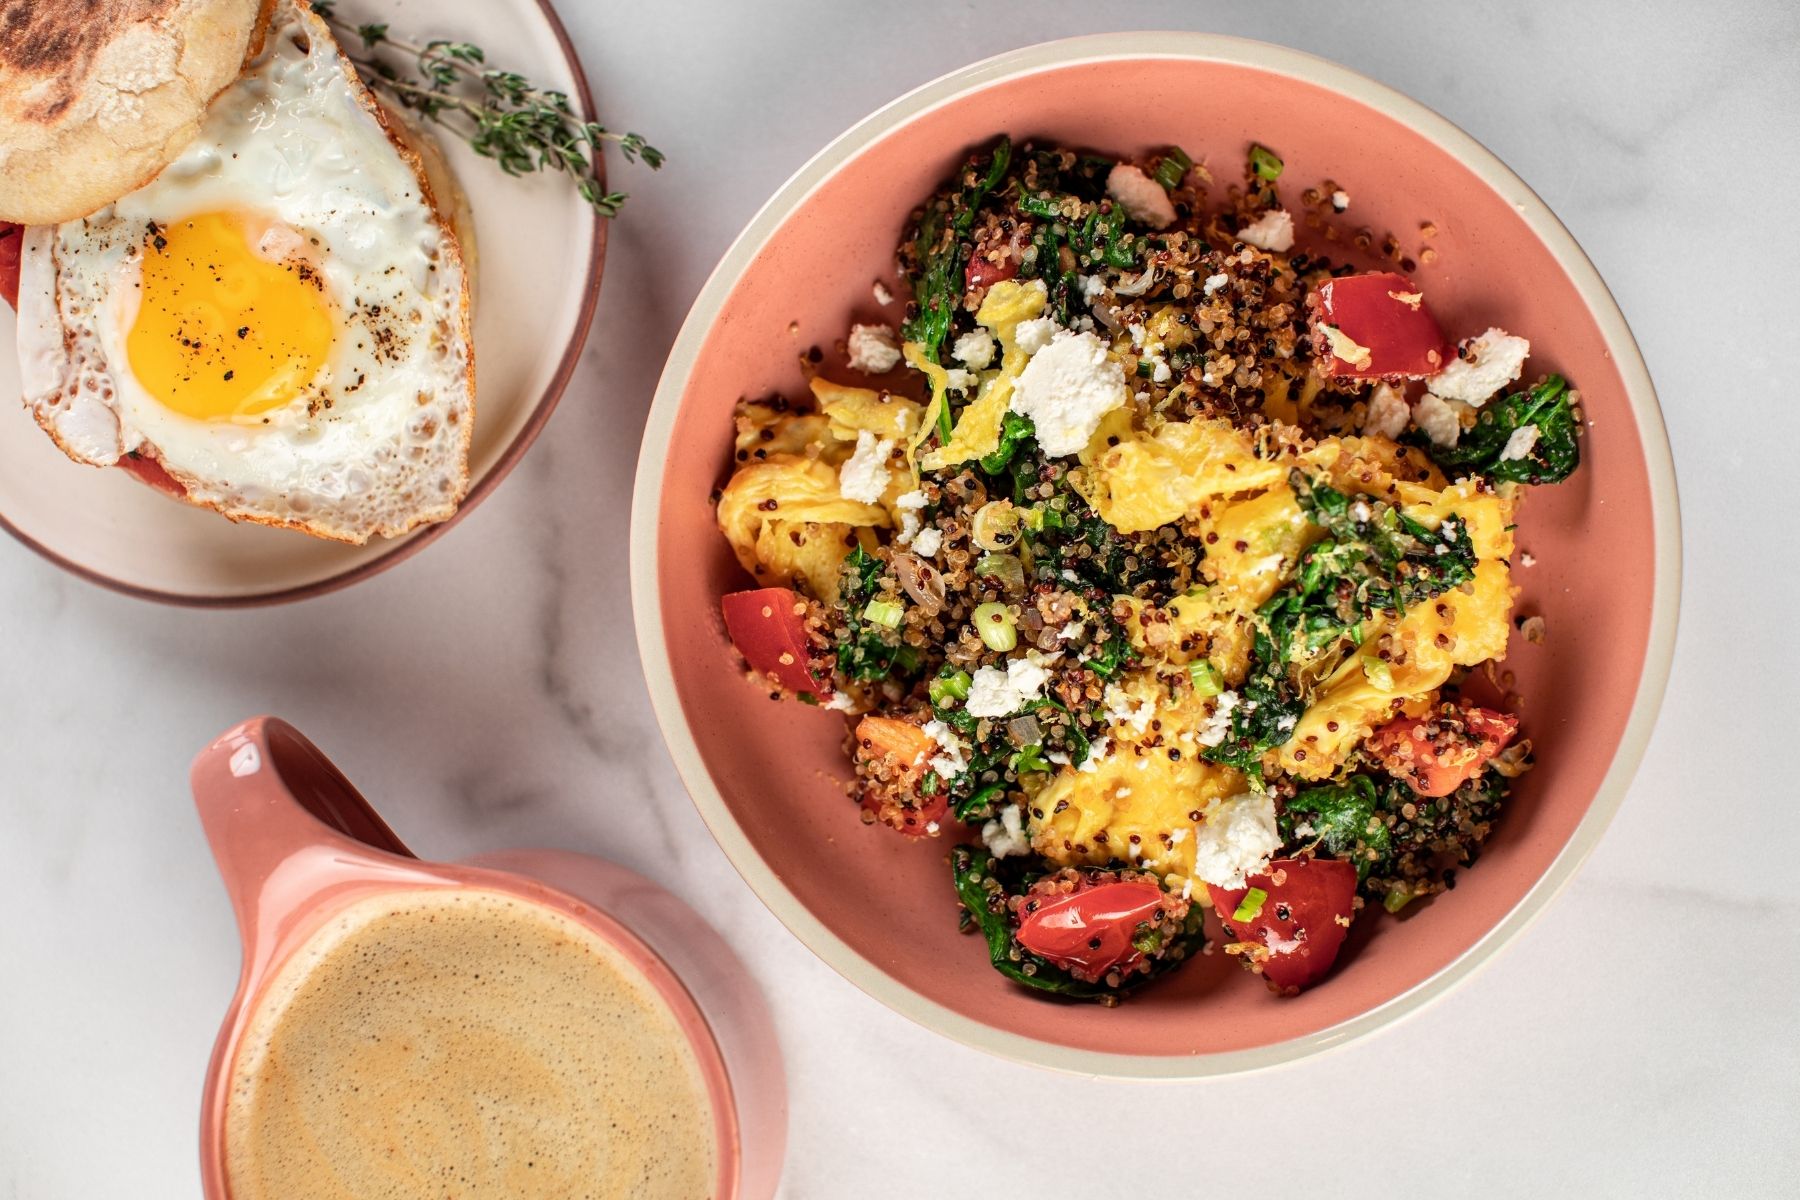 A pink bowl with a breakfast scramble inside, served with veggies and quinoa.